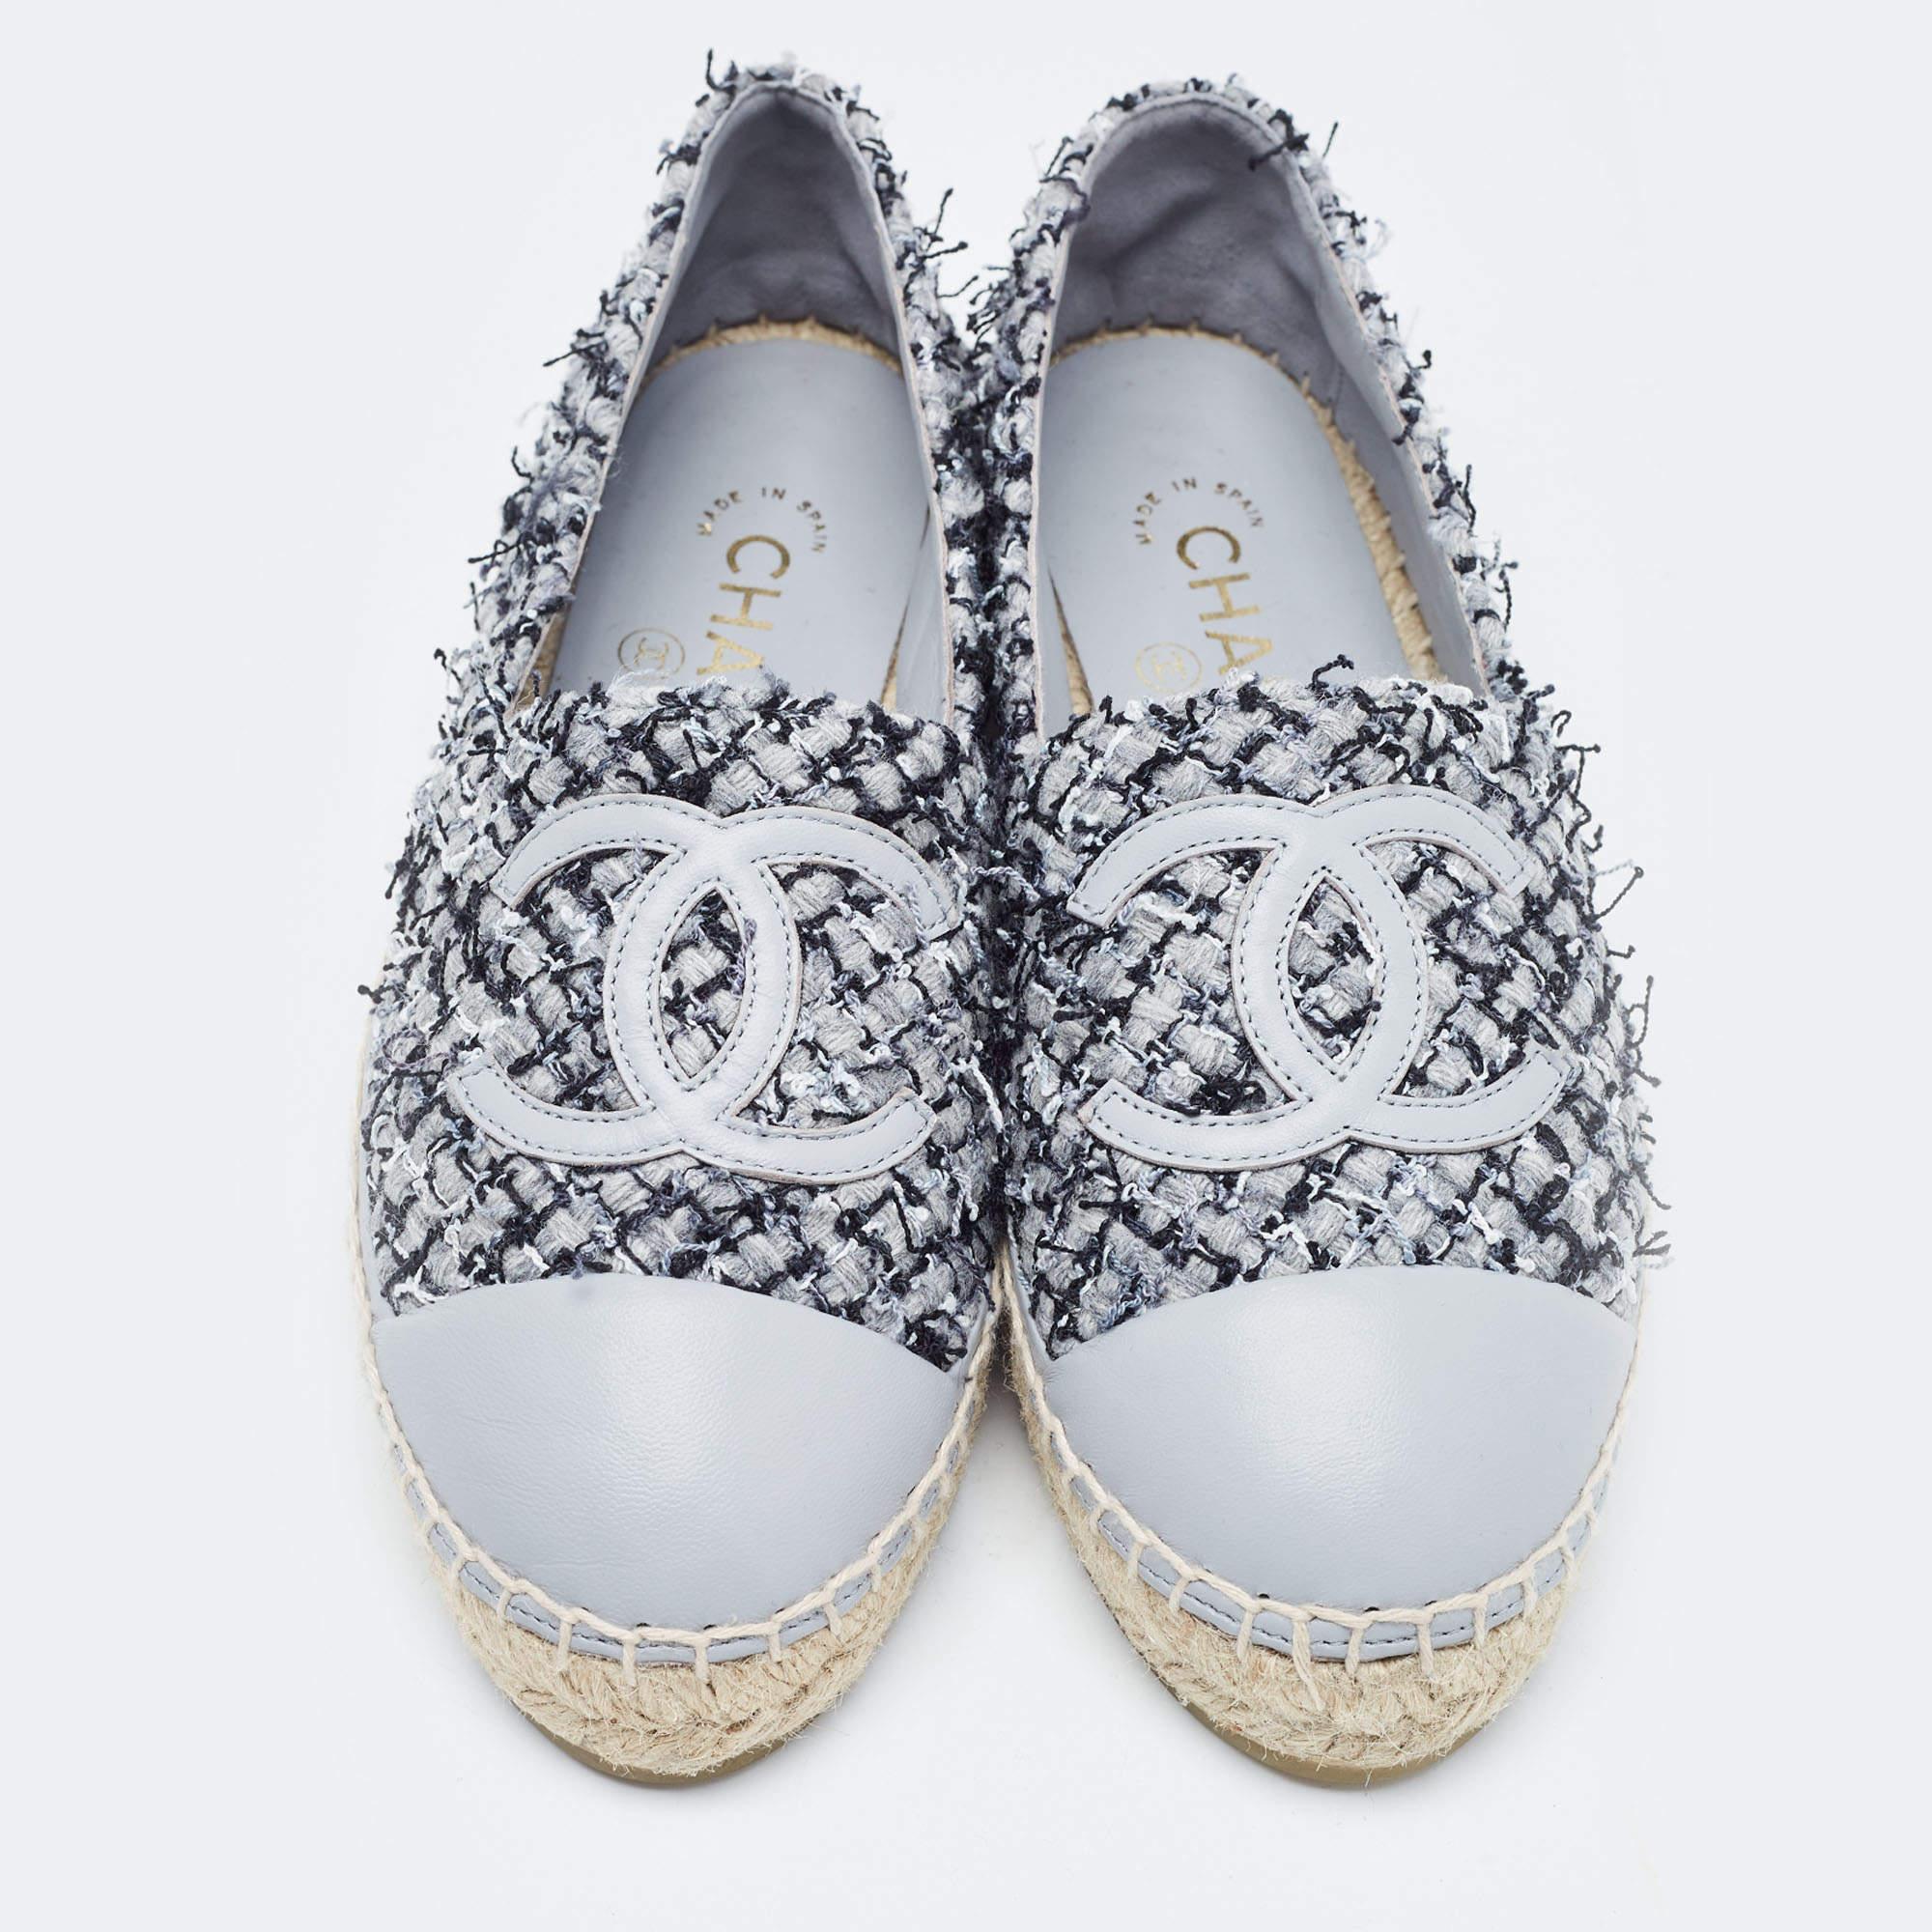 Chanel Grey Tweed and Leather Cap Toe CC Espadrille Flats Size 36 1